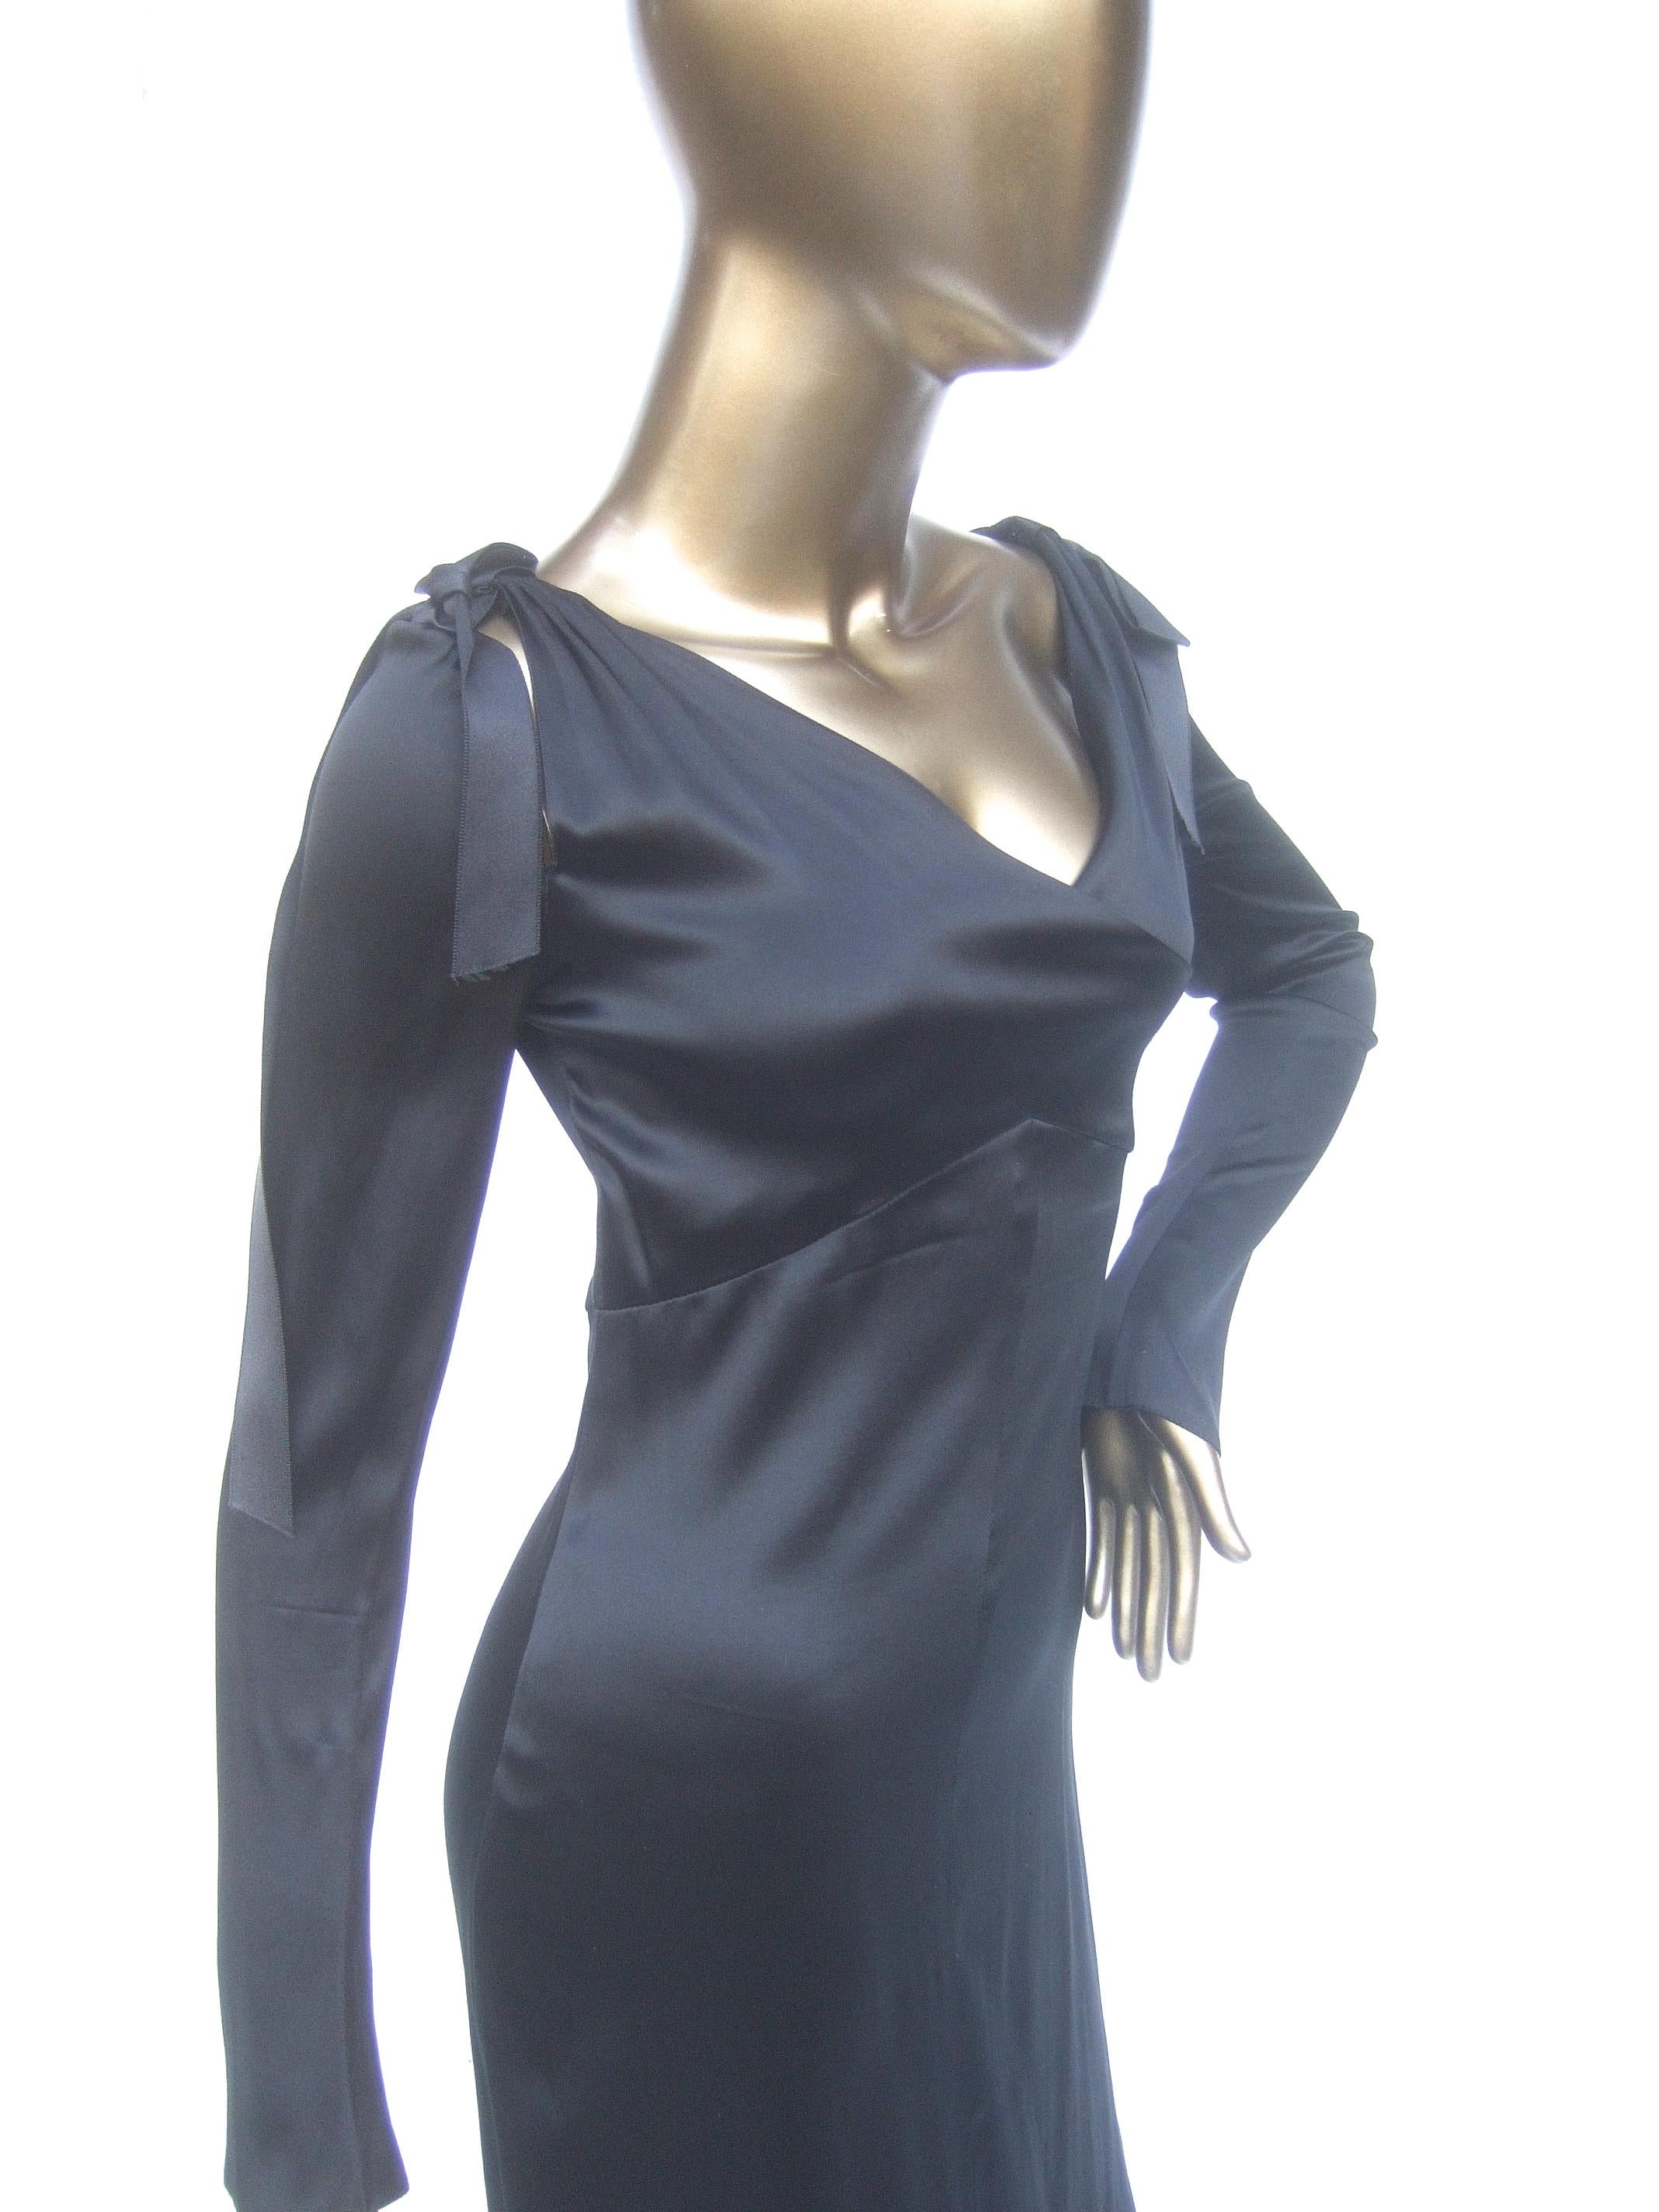 Chanel Silk Charmeuse Ribbon Trim Cocktail Dress Circa 1990s In Good Condition For Sale In University City, MO